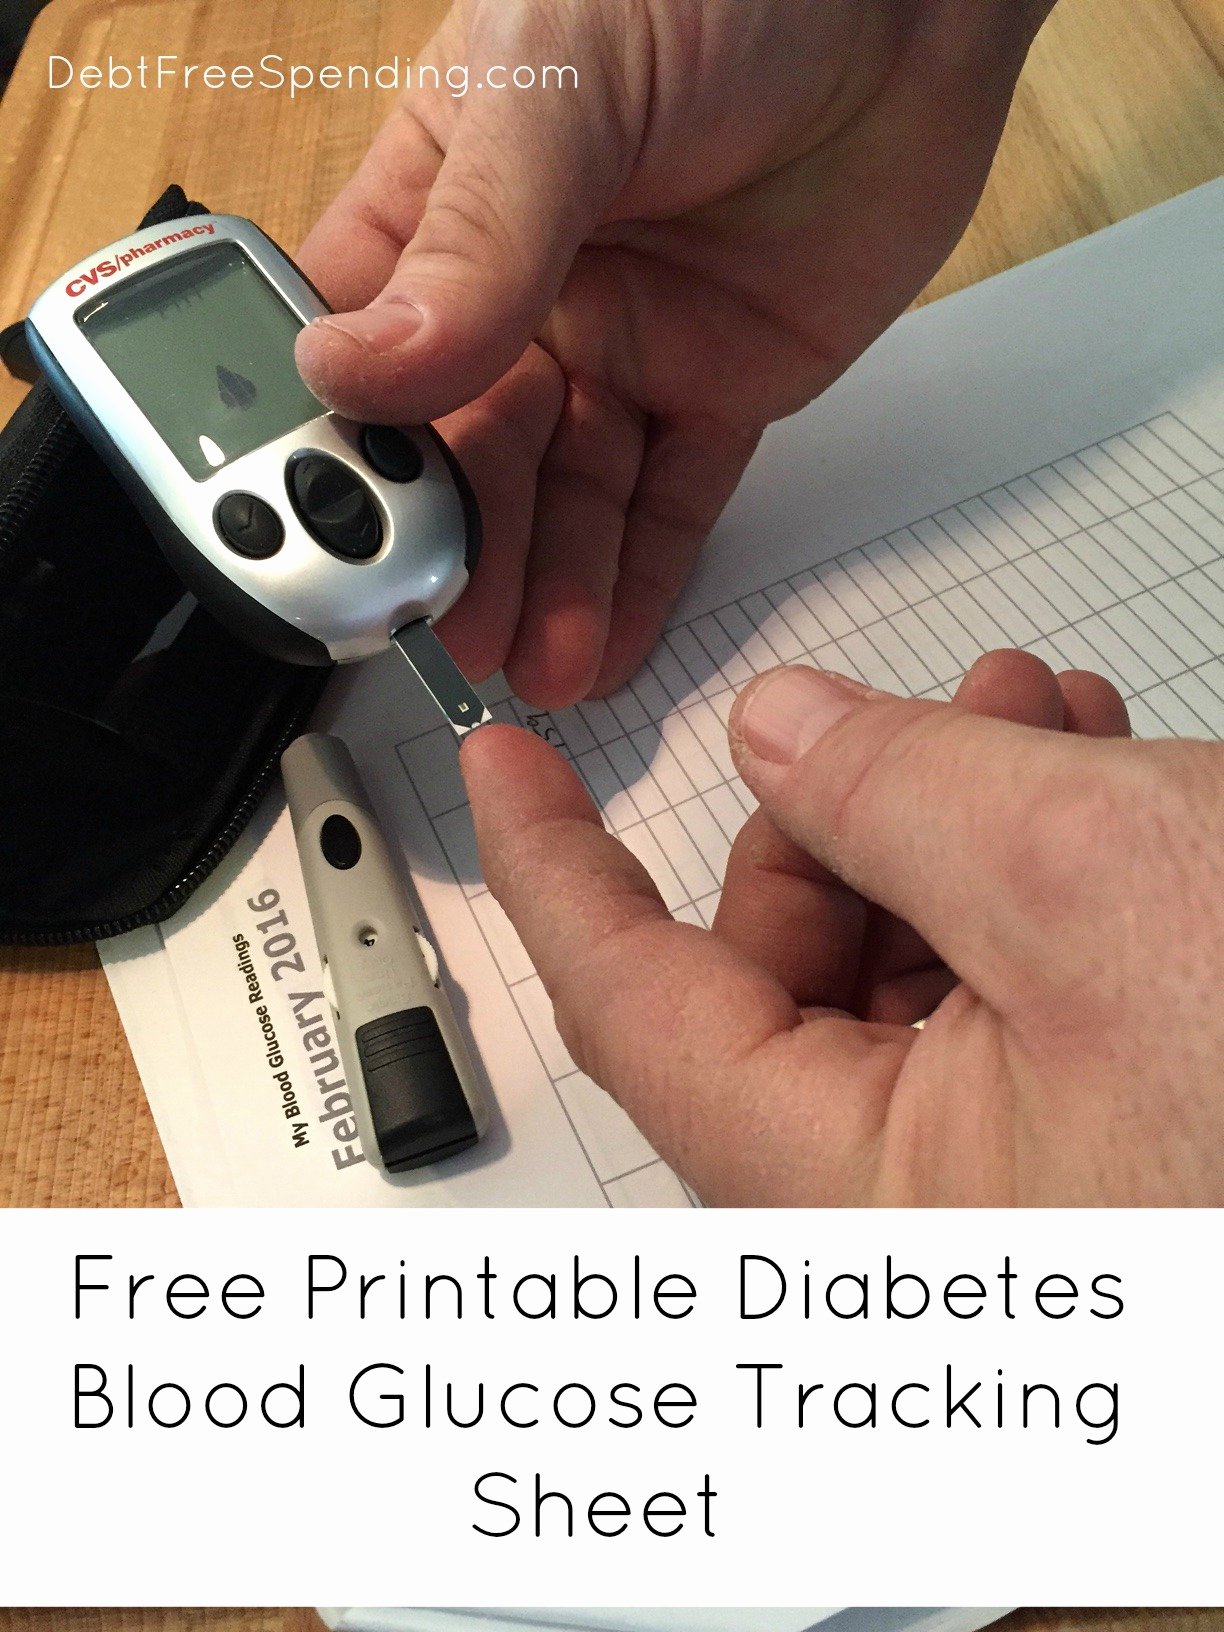 Diabetes Tracking Chart Printable New Blood Glucose Tracking for Diabetes Free Printable Debt